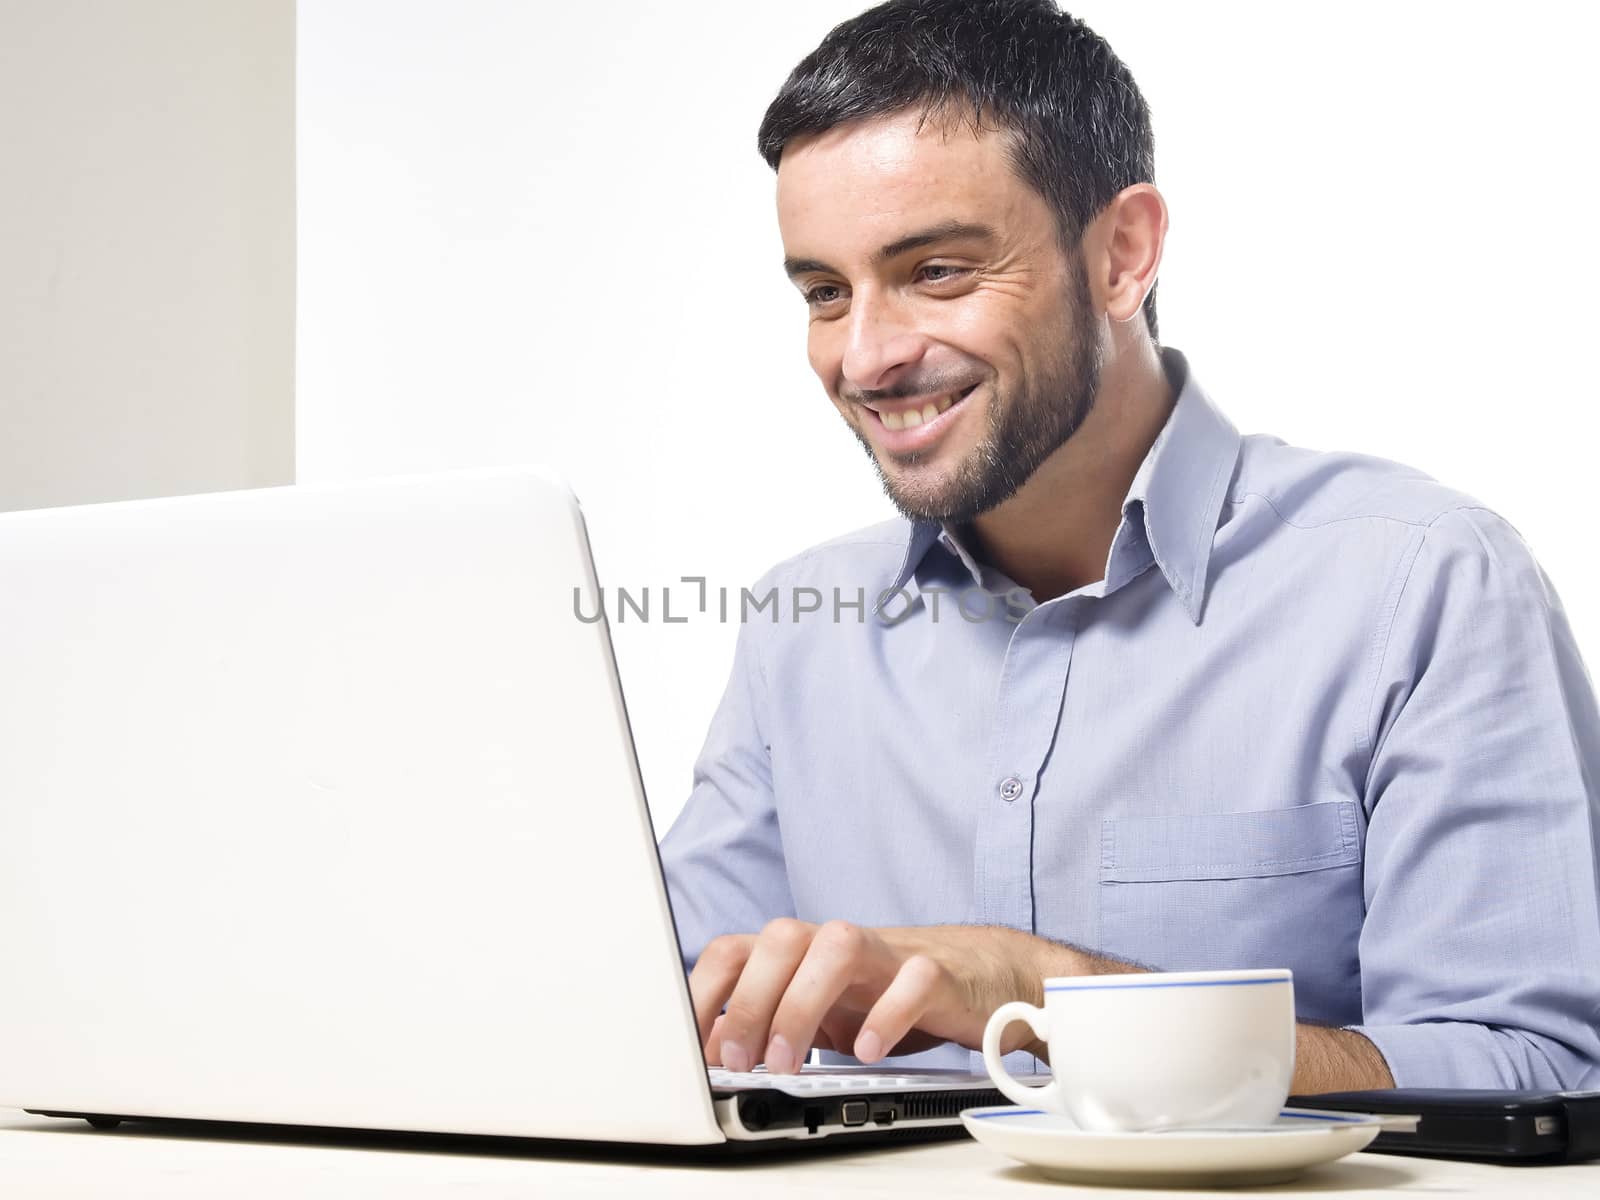 Young Man with Beard Working on Laptop isolated on a White Background